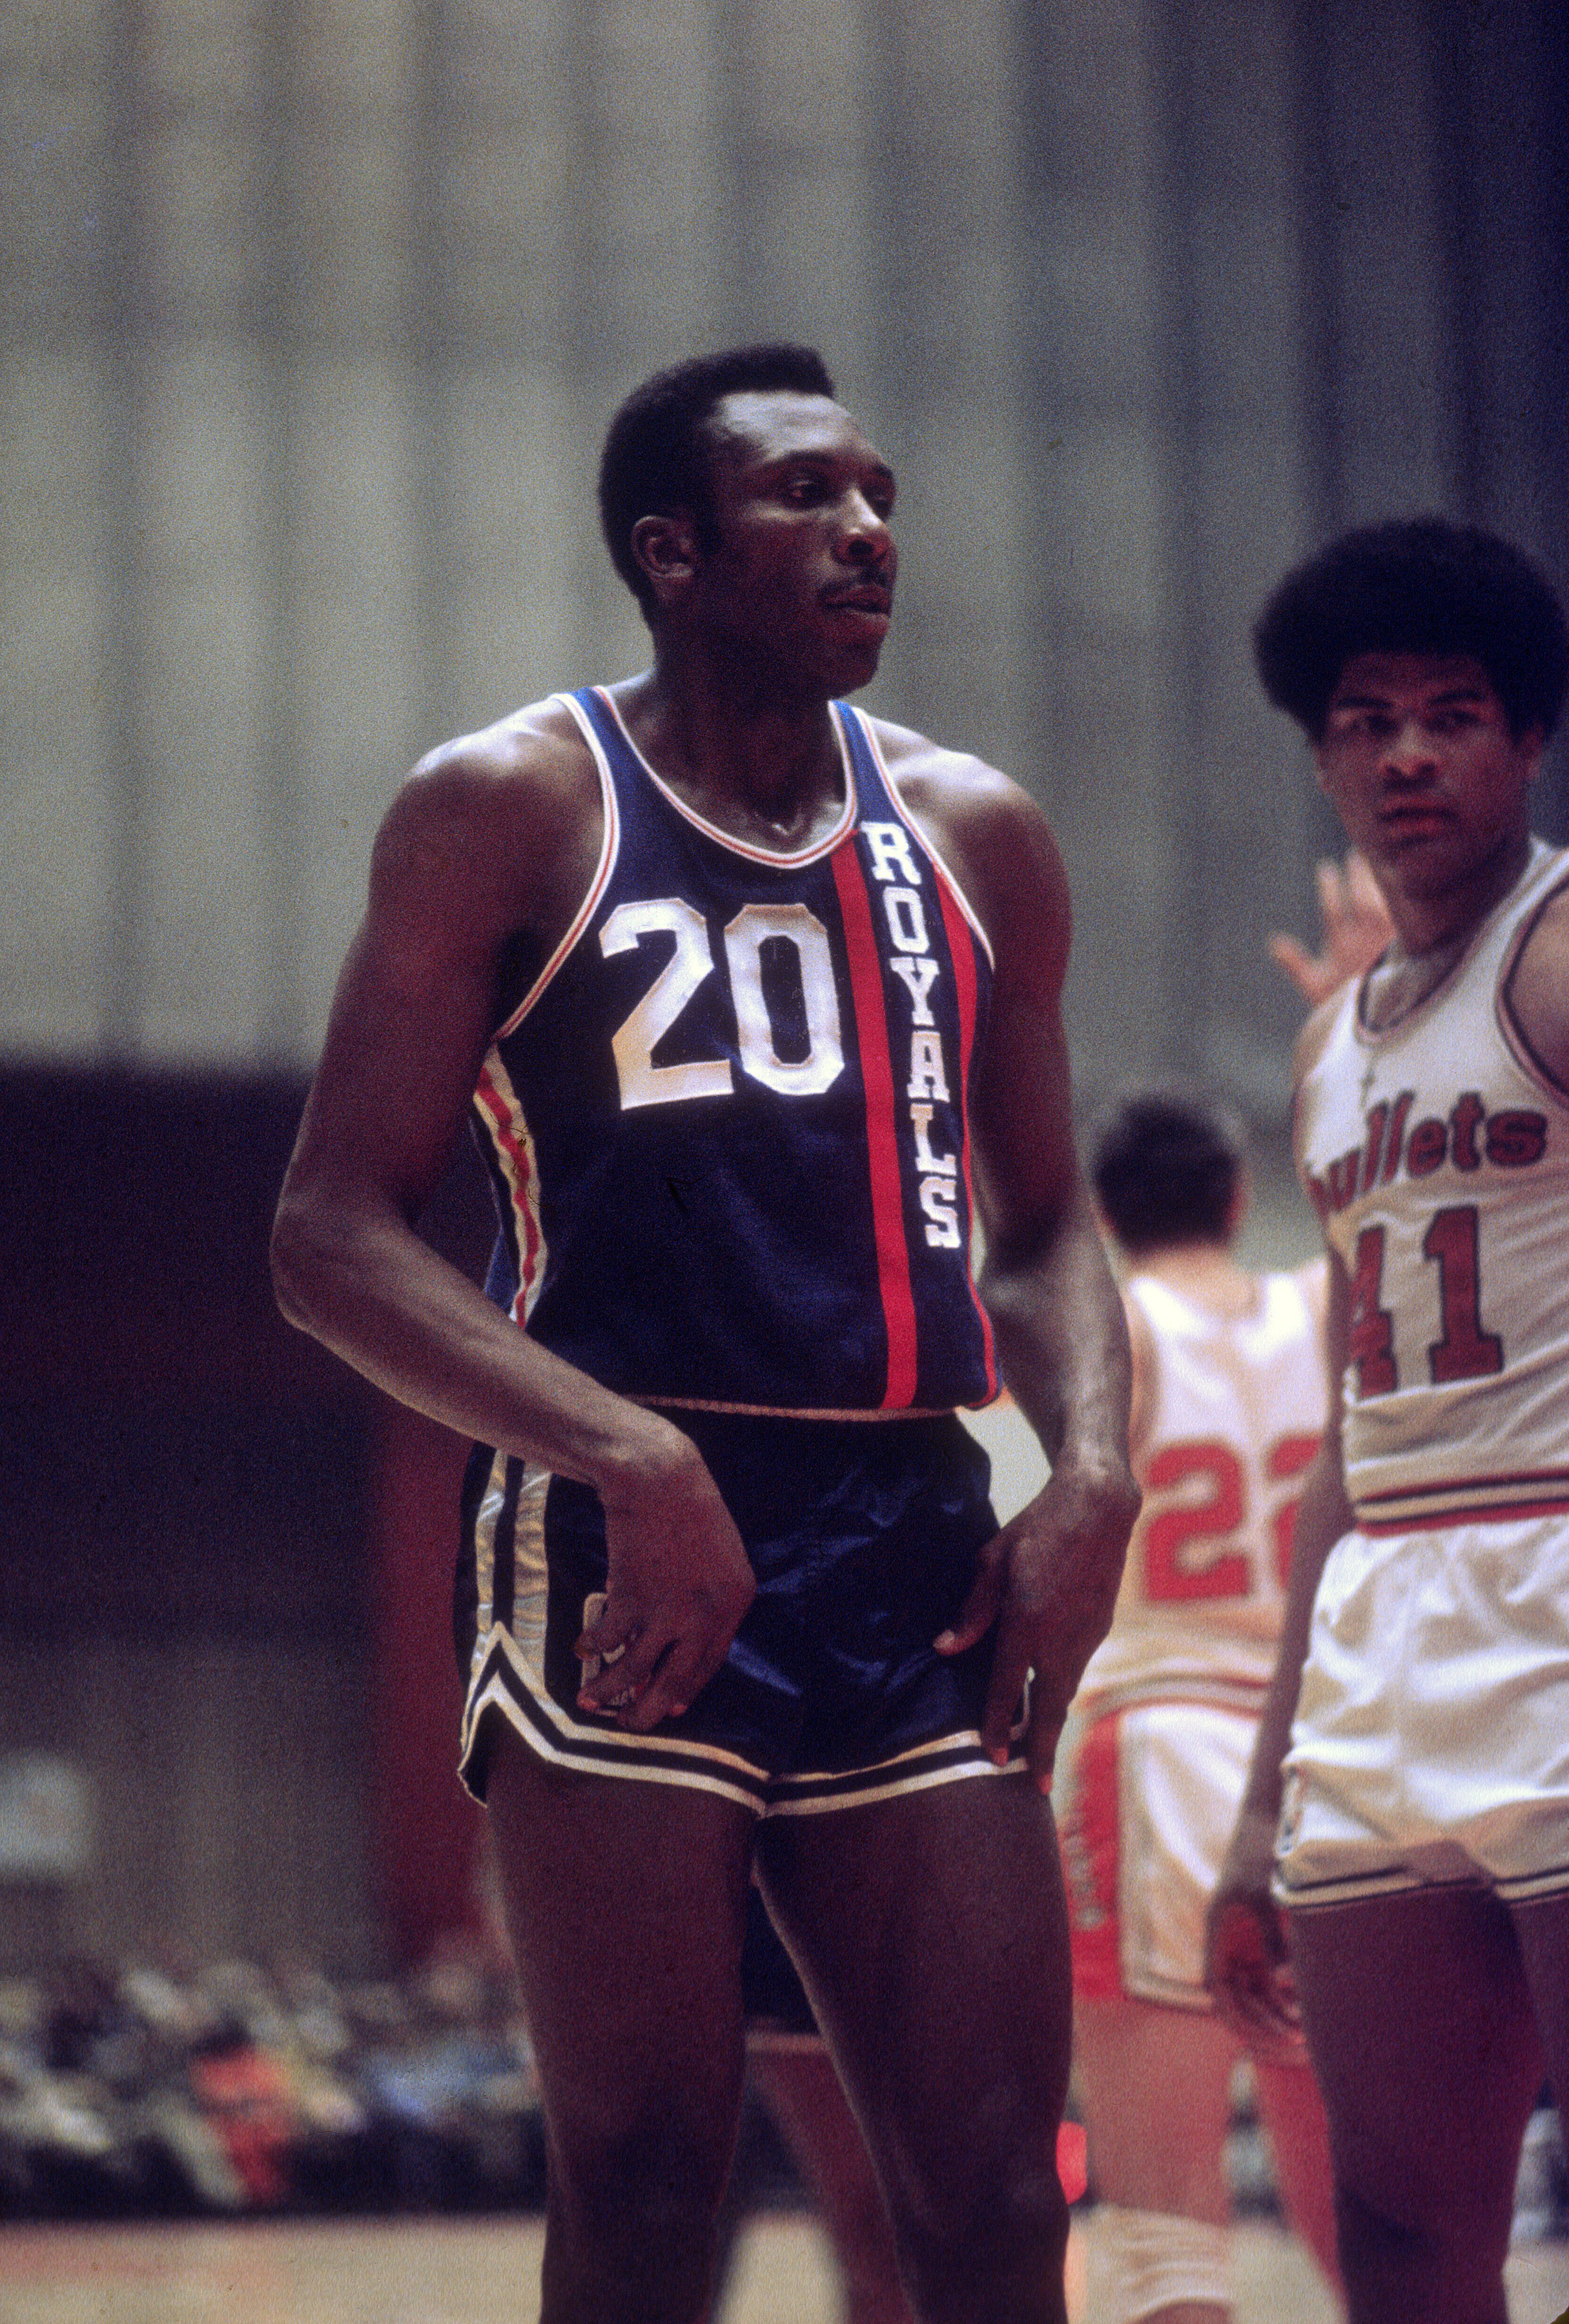 The 25 Best Jerseys in NBA History Will Always Be Colorfully